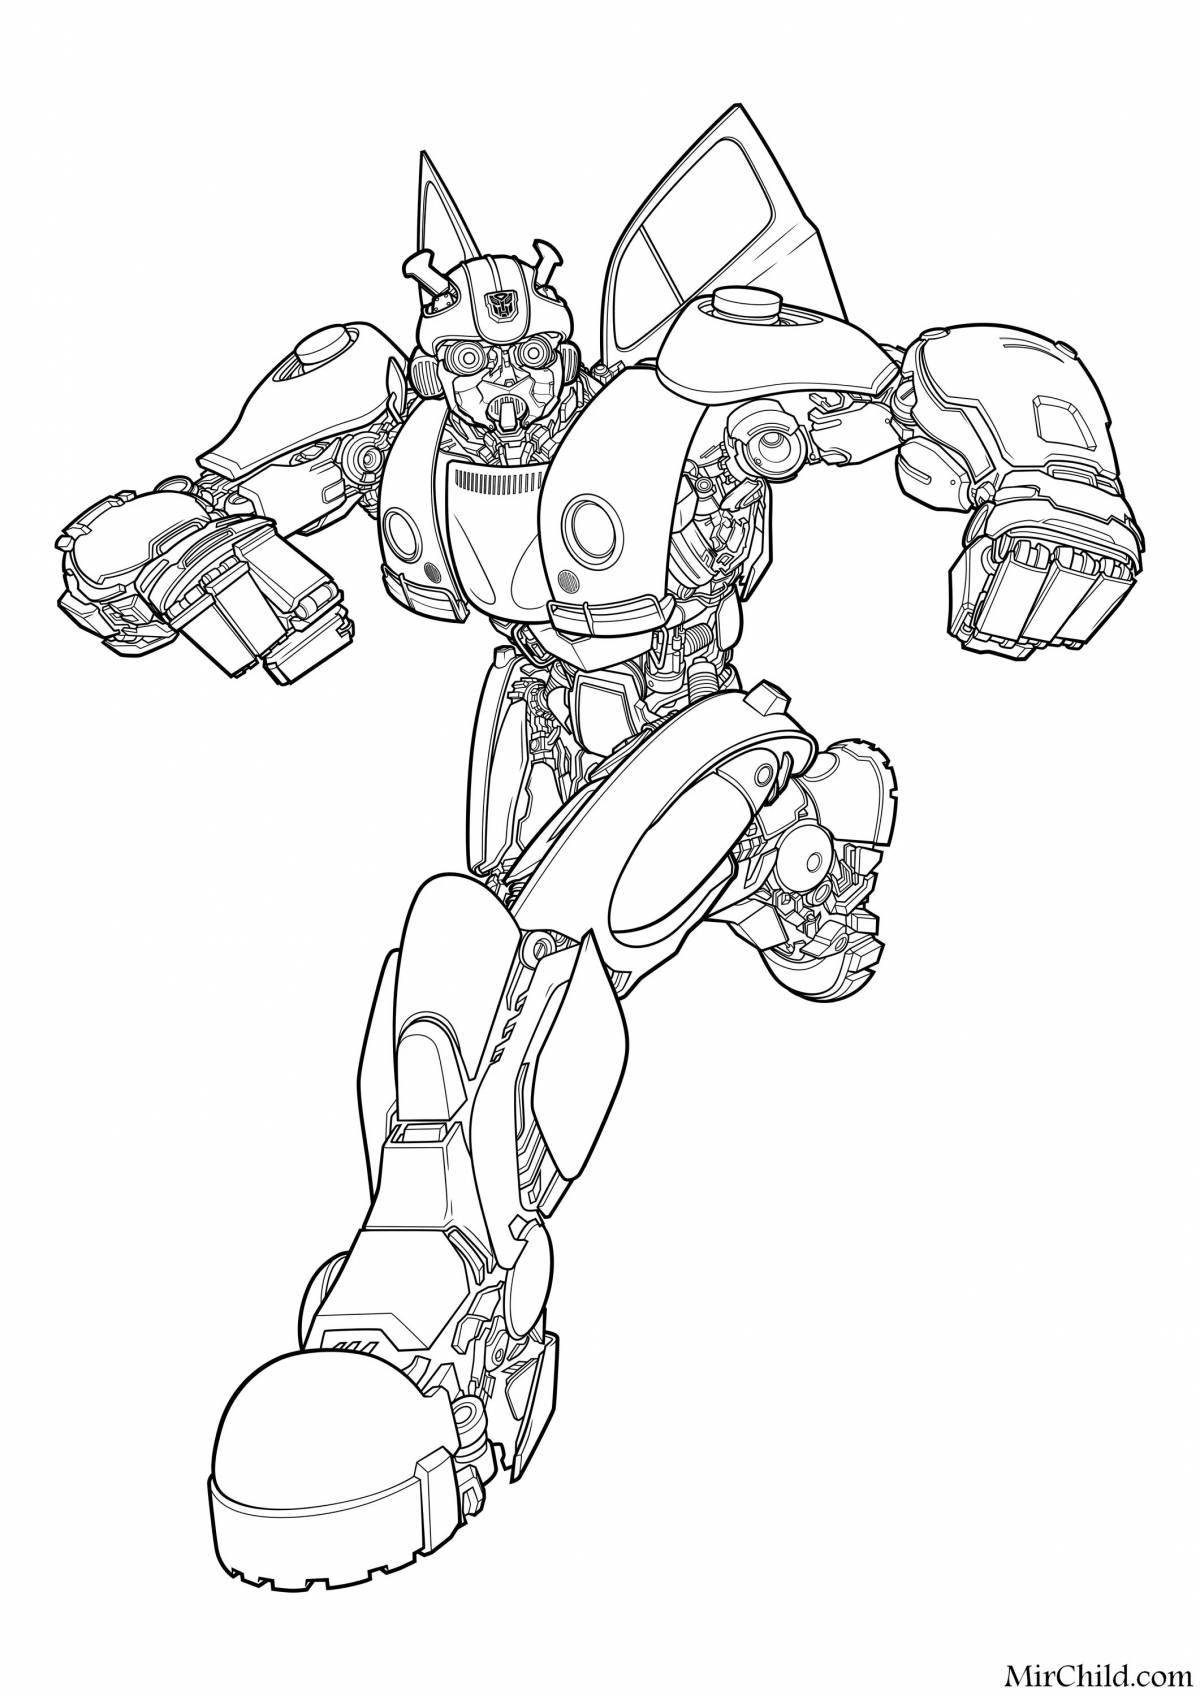 Bumblebee dynamic coloring book